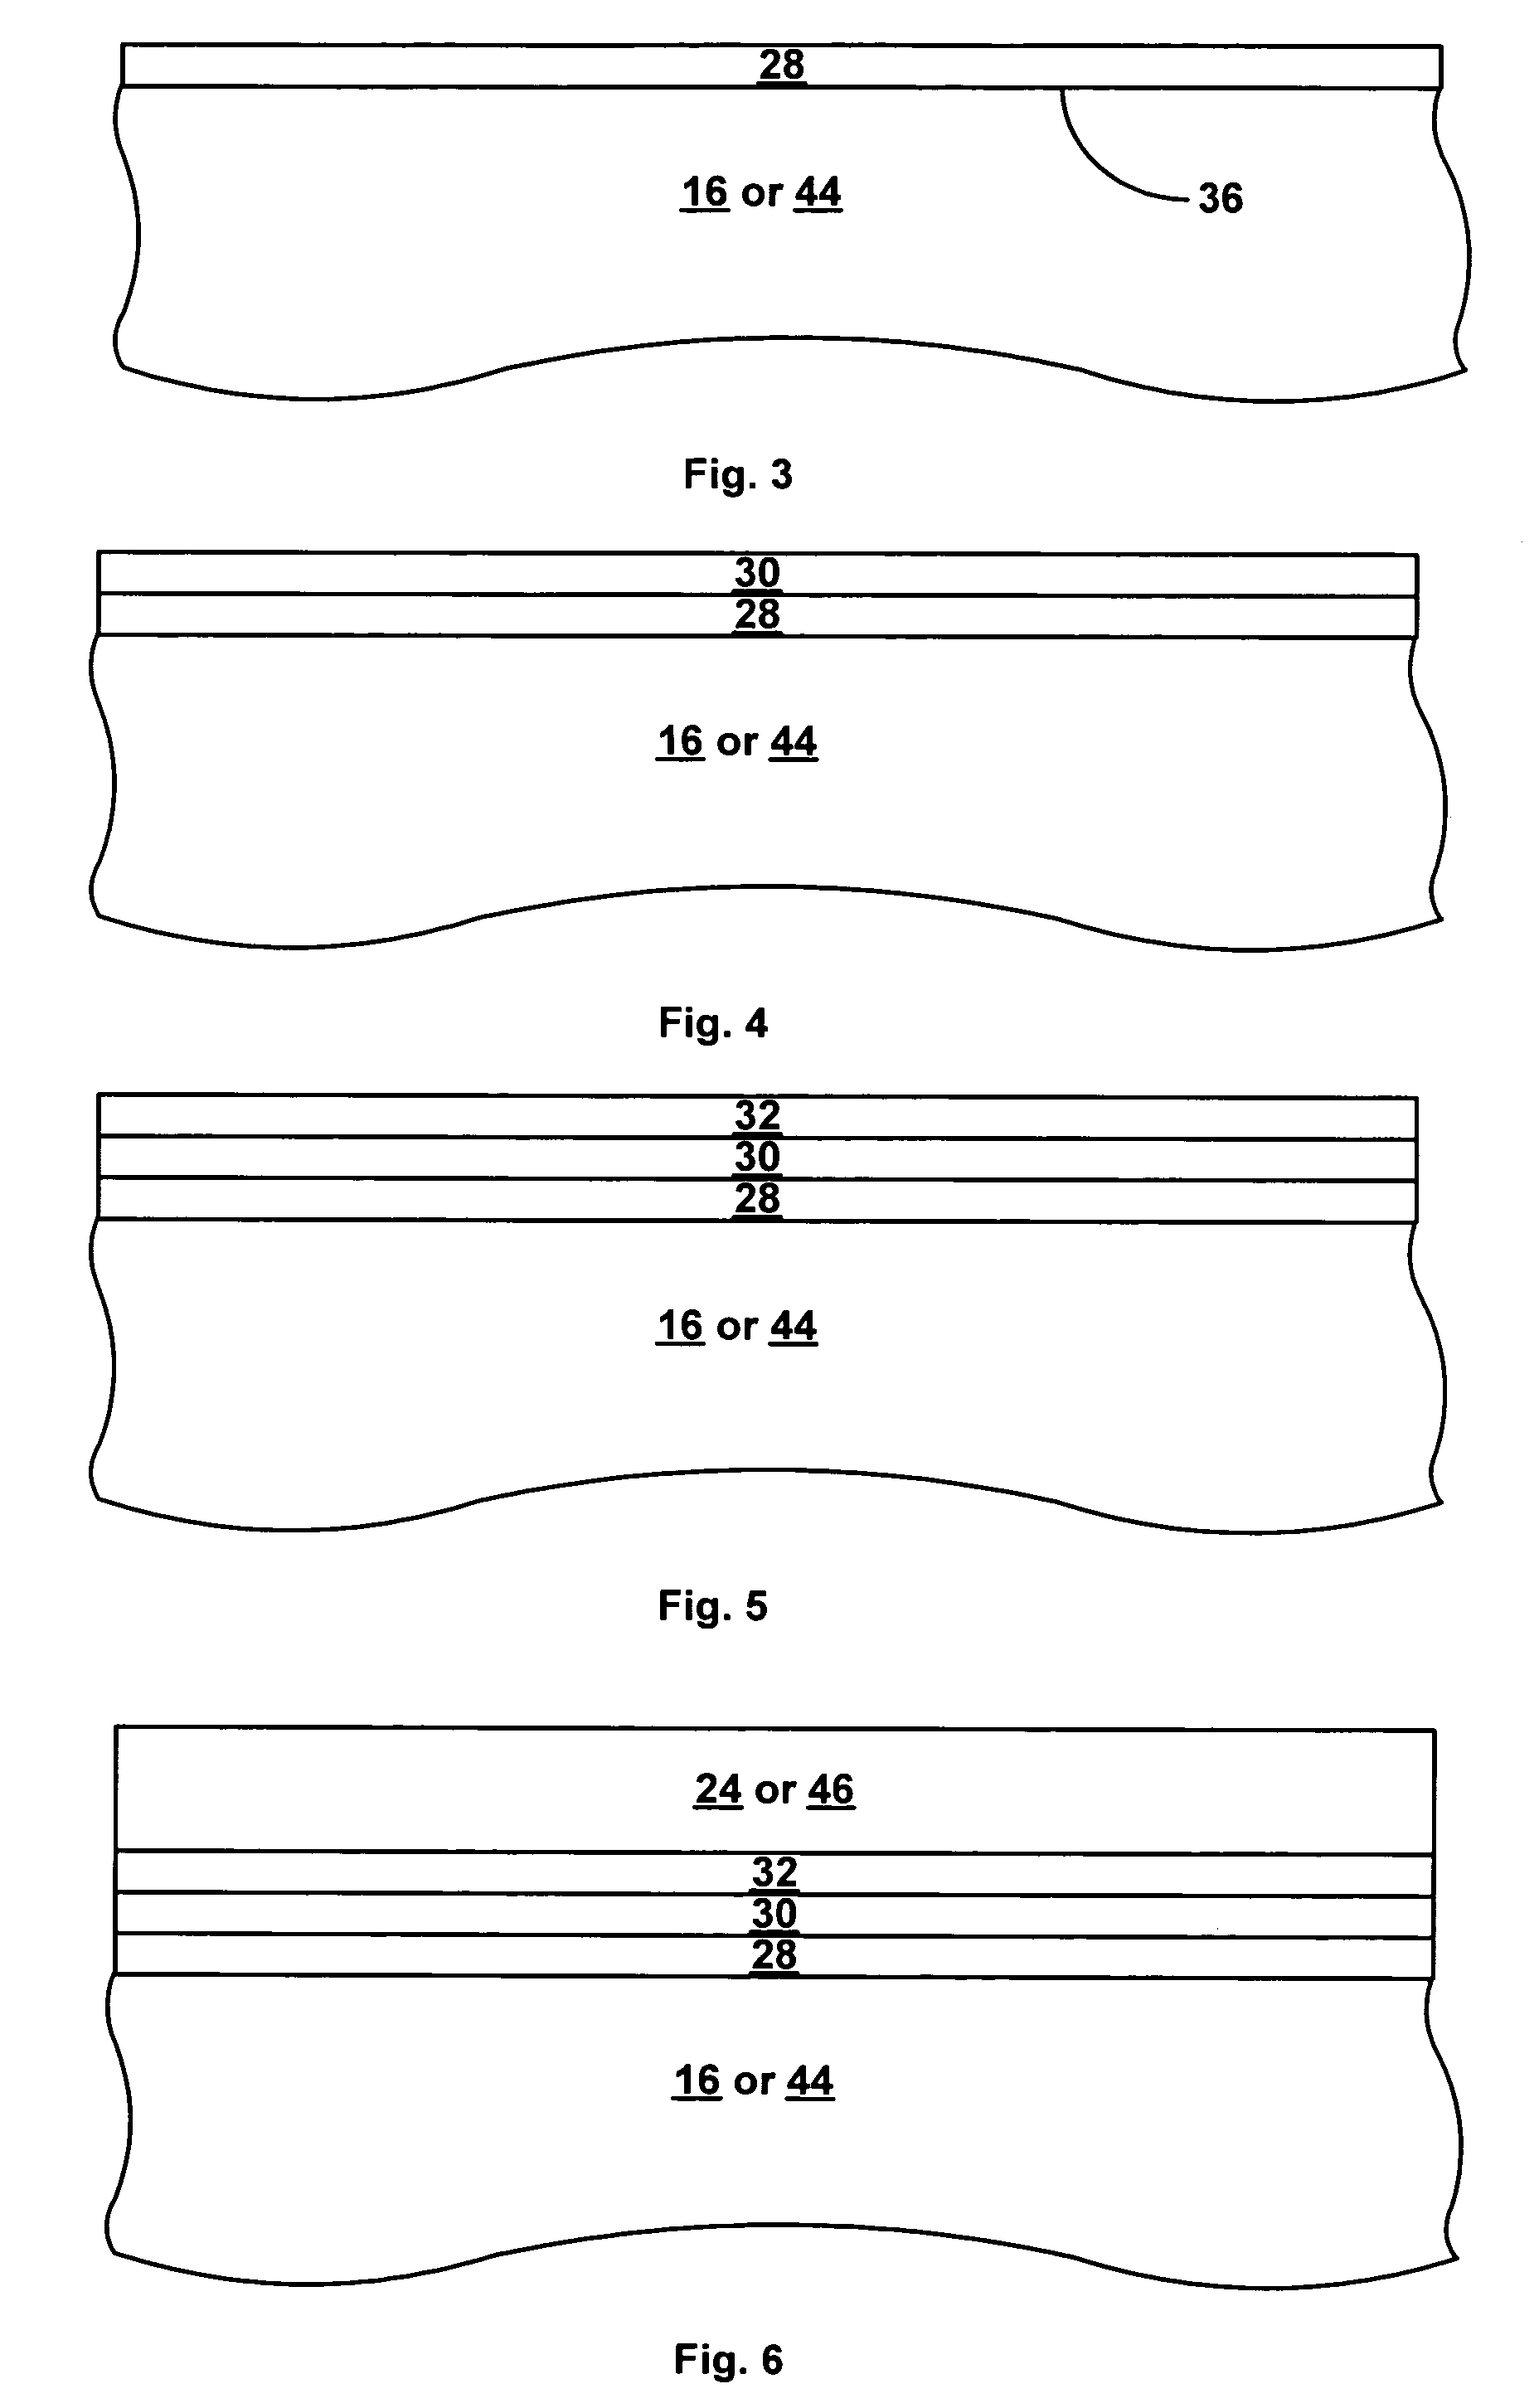 Integrated ONO processing for semiconductor devices using in-situ steam generation (ISSG) process